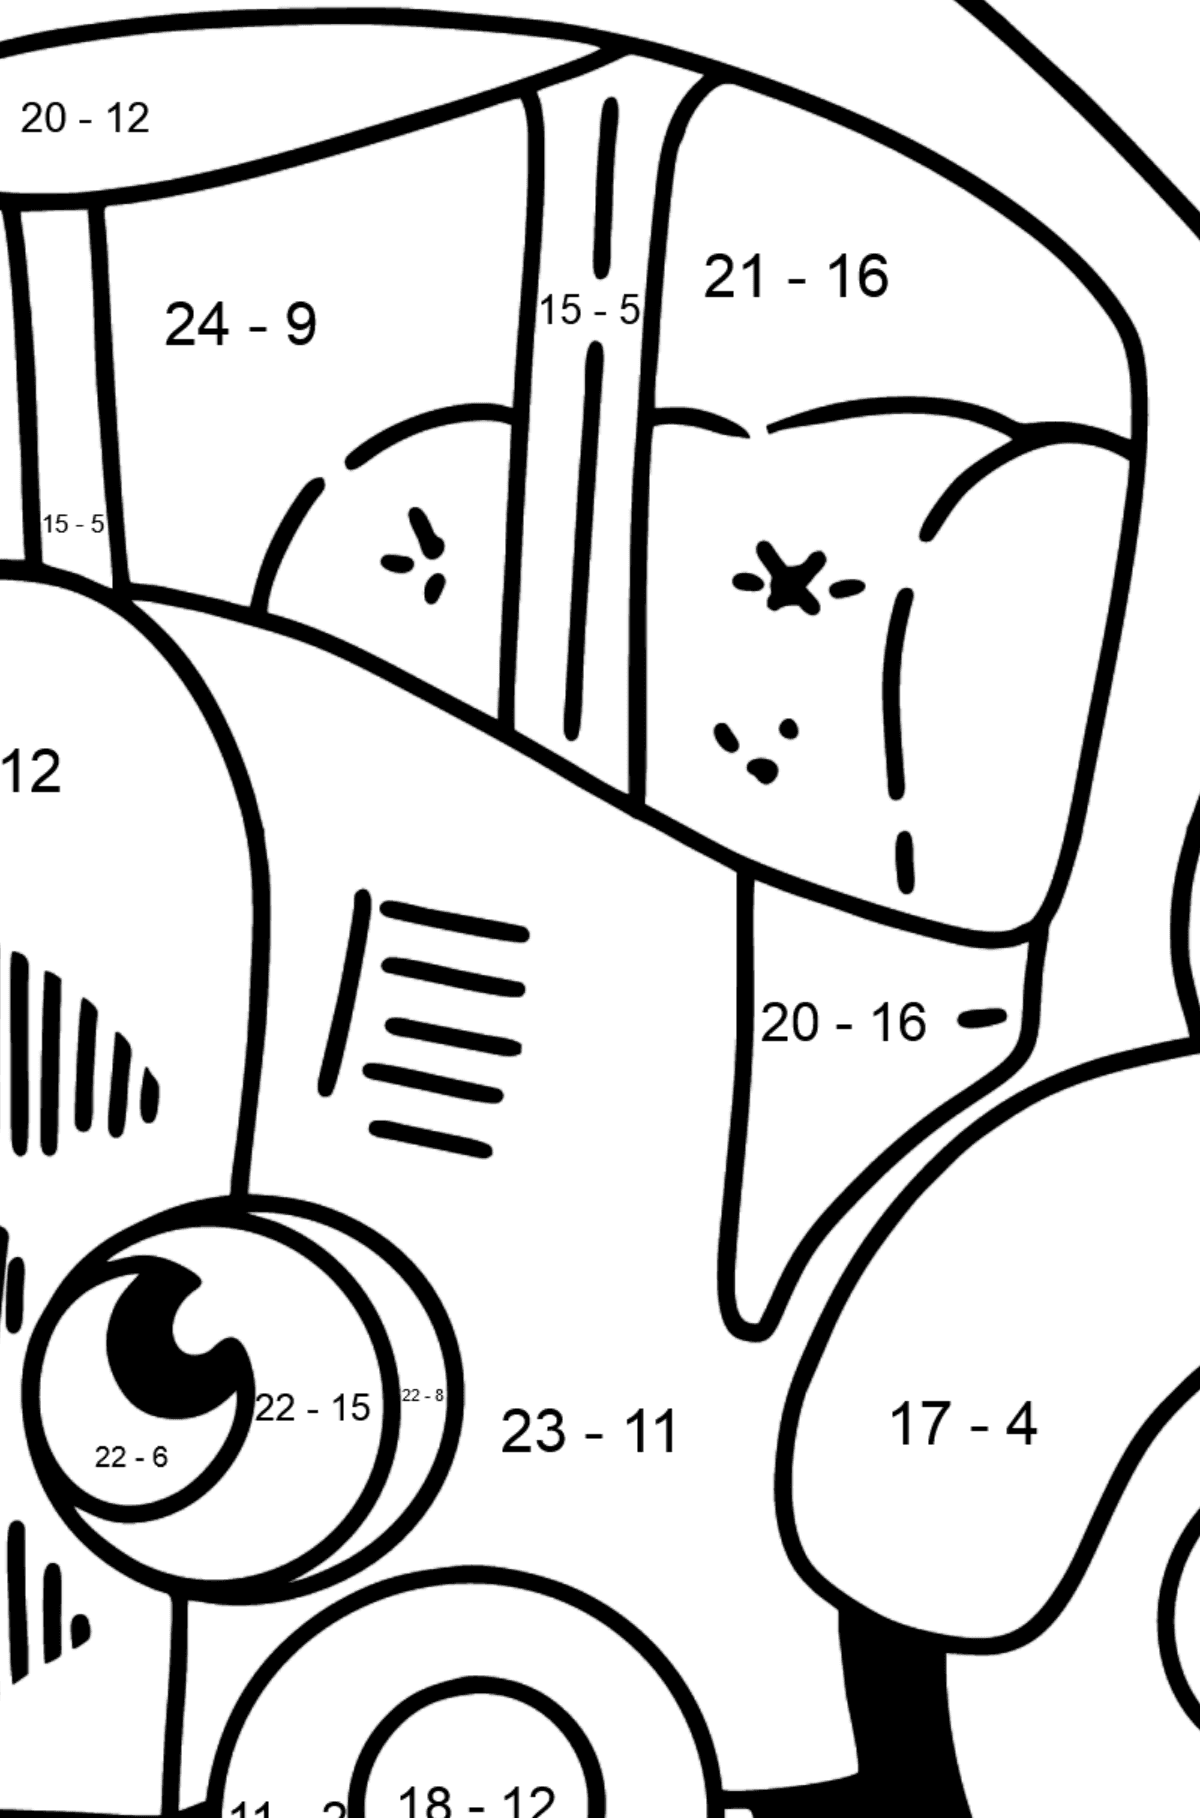 Blue Tractor coloring page - Math Coloring - Subtraction for Kids